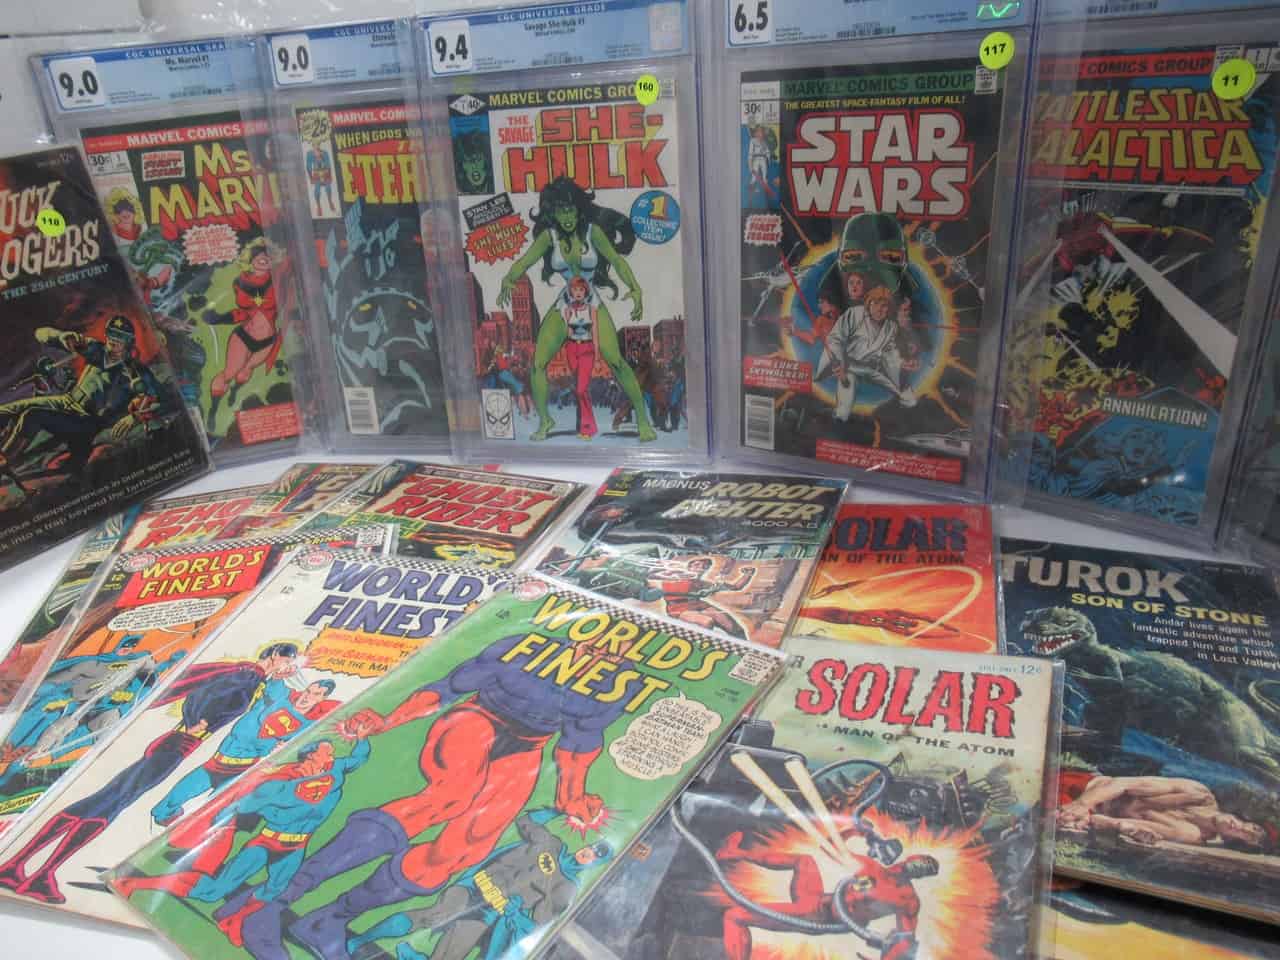 Check Out These High Grade Comics!